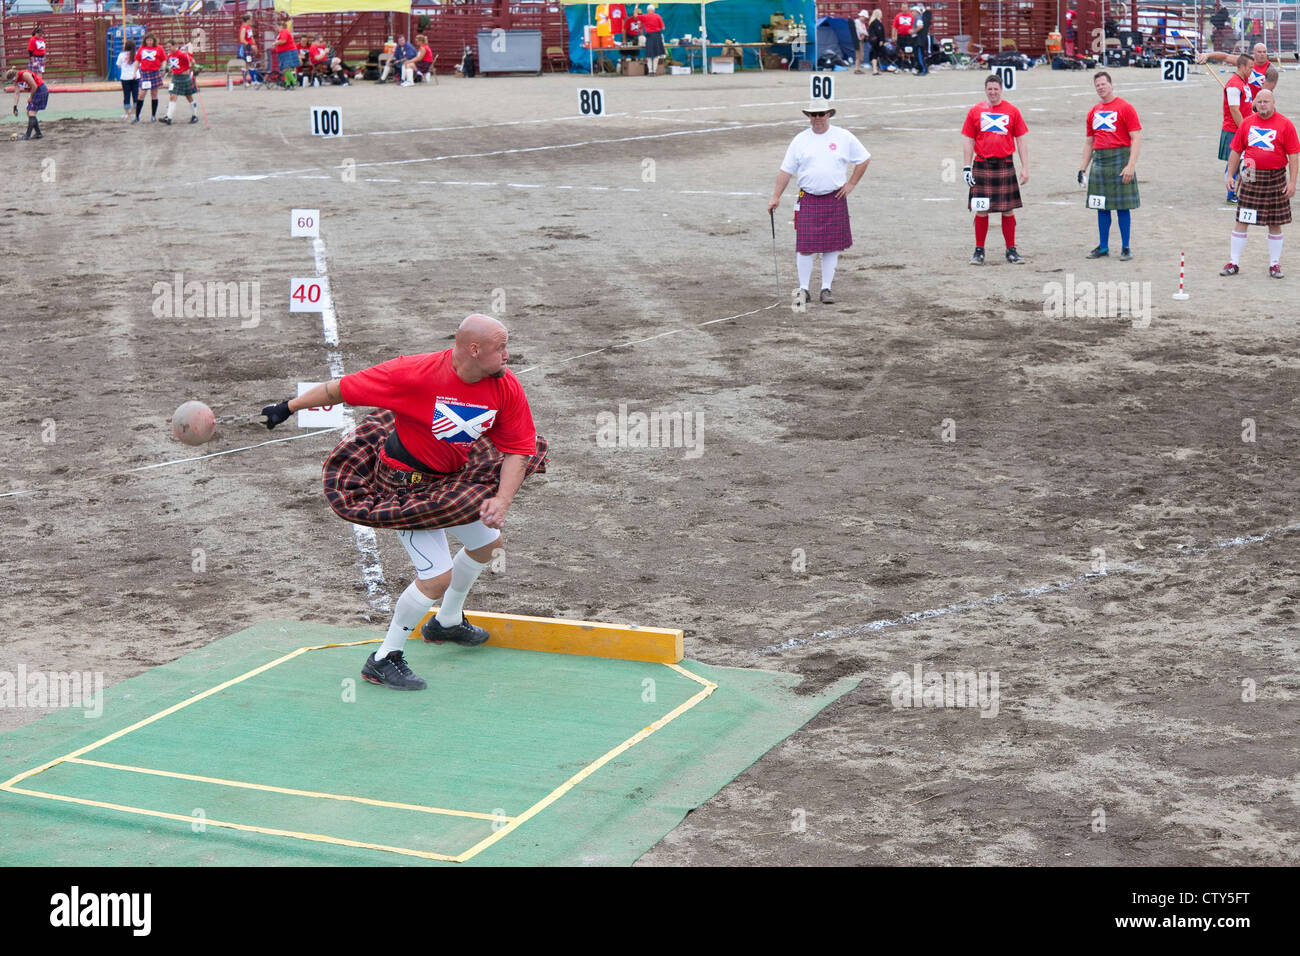 The Weight Throw Event at the 66th Annual Pacific Northwest Scottish Highland Games and Clan Gathering - Enumclaw, Washington. Stock Photo